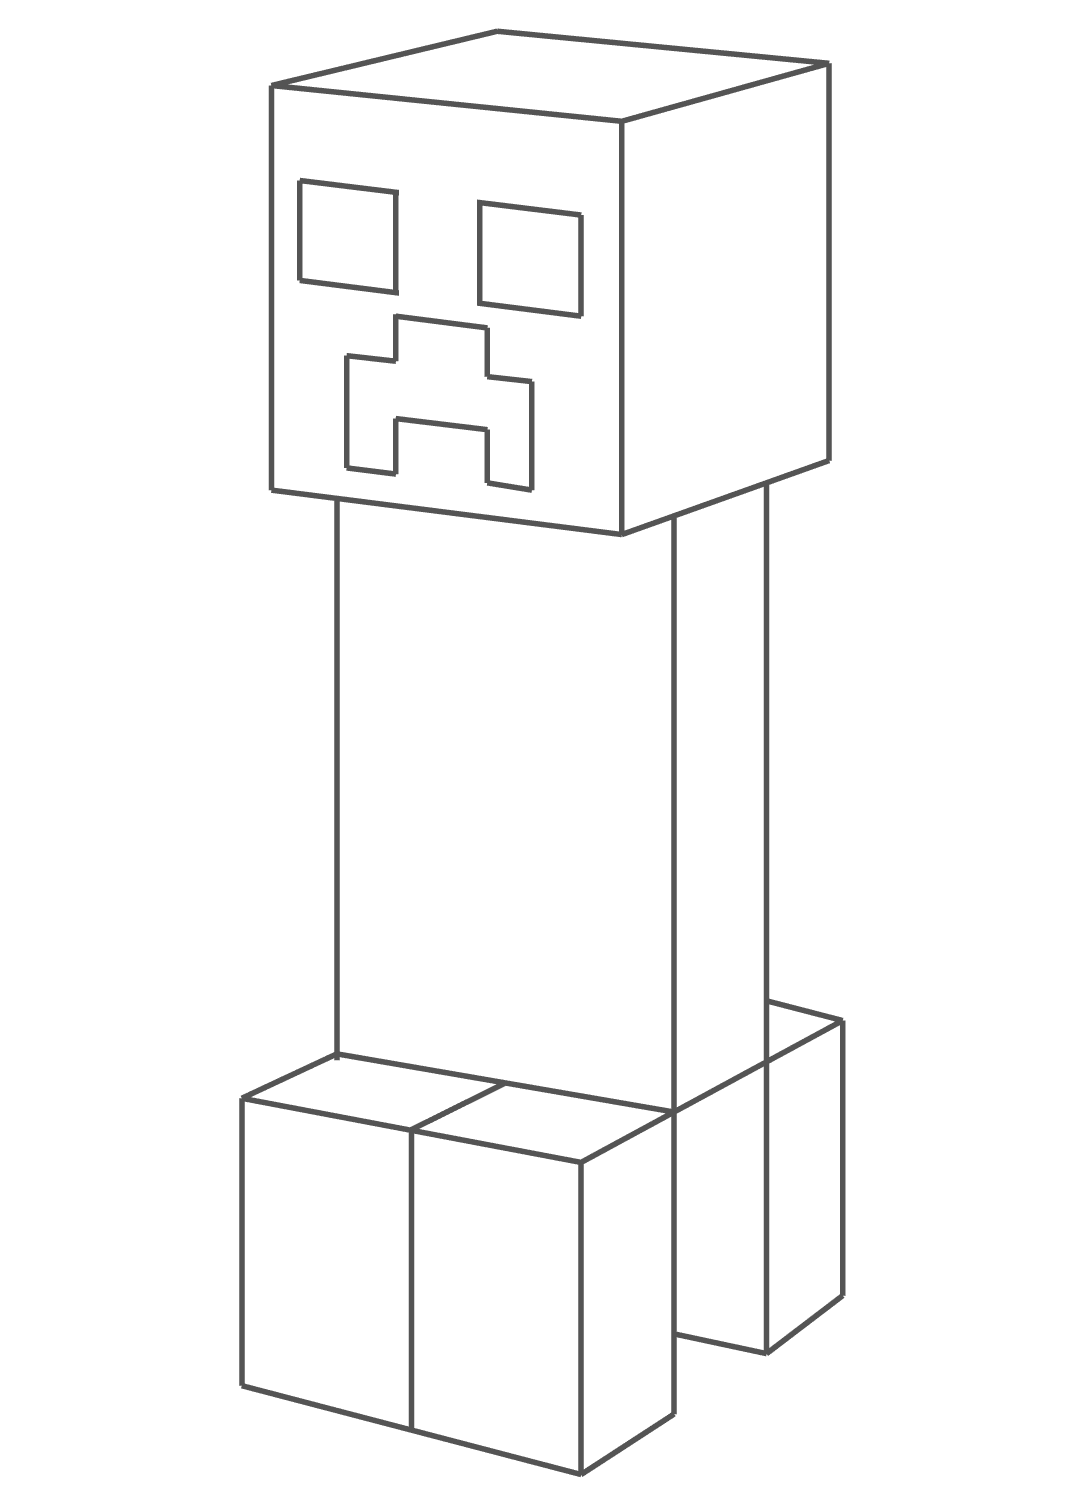 Creeper Coloring Page